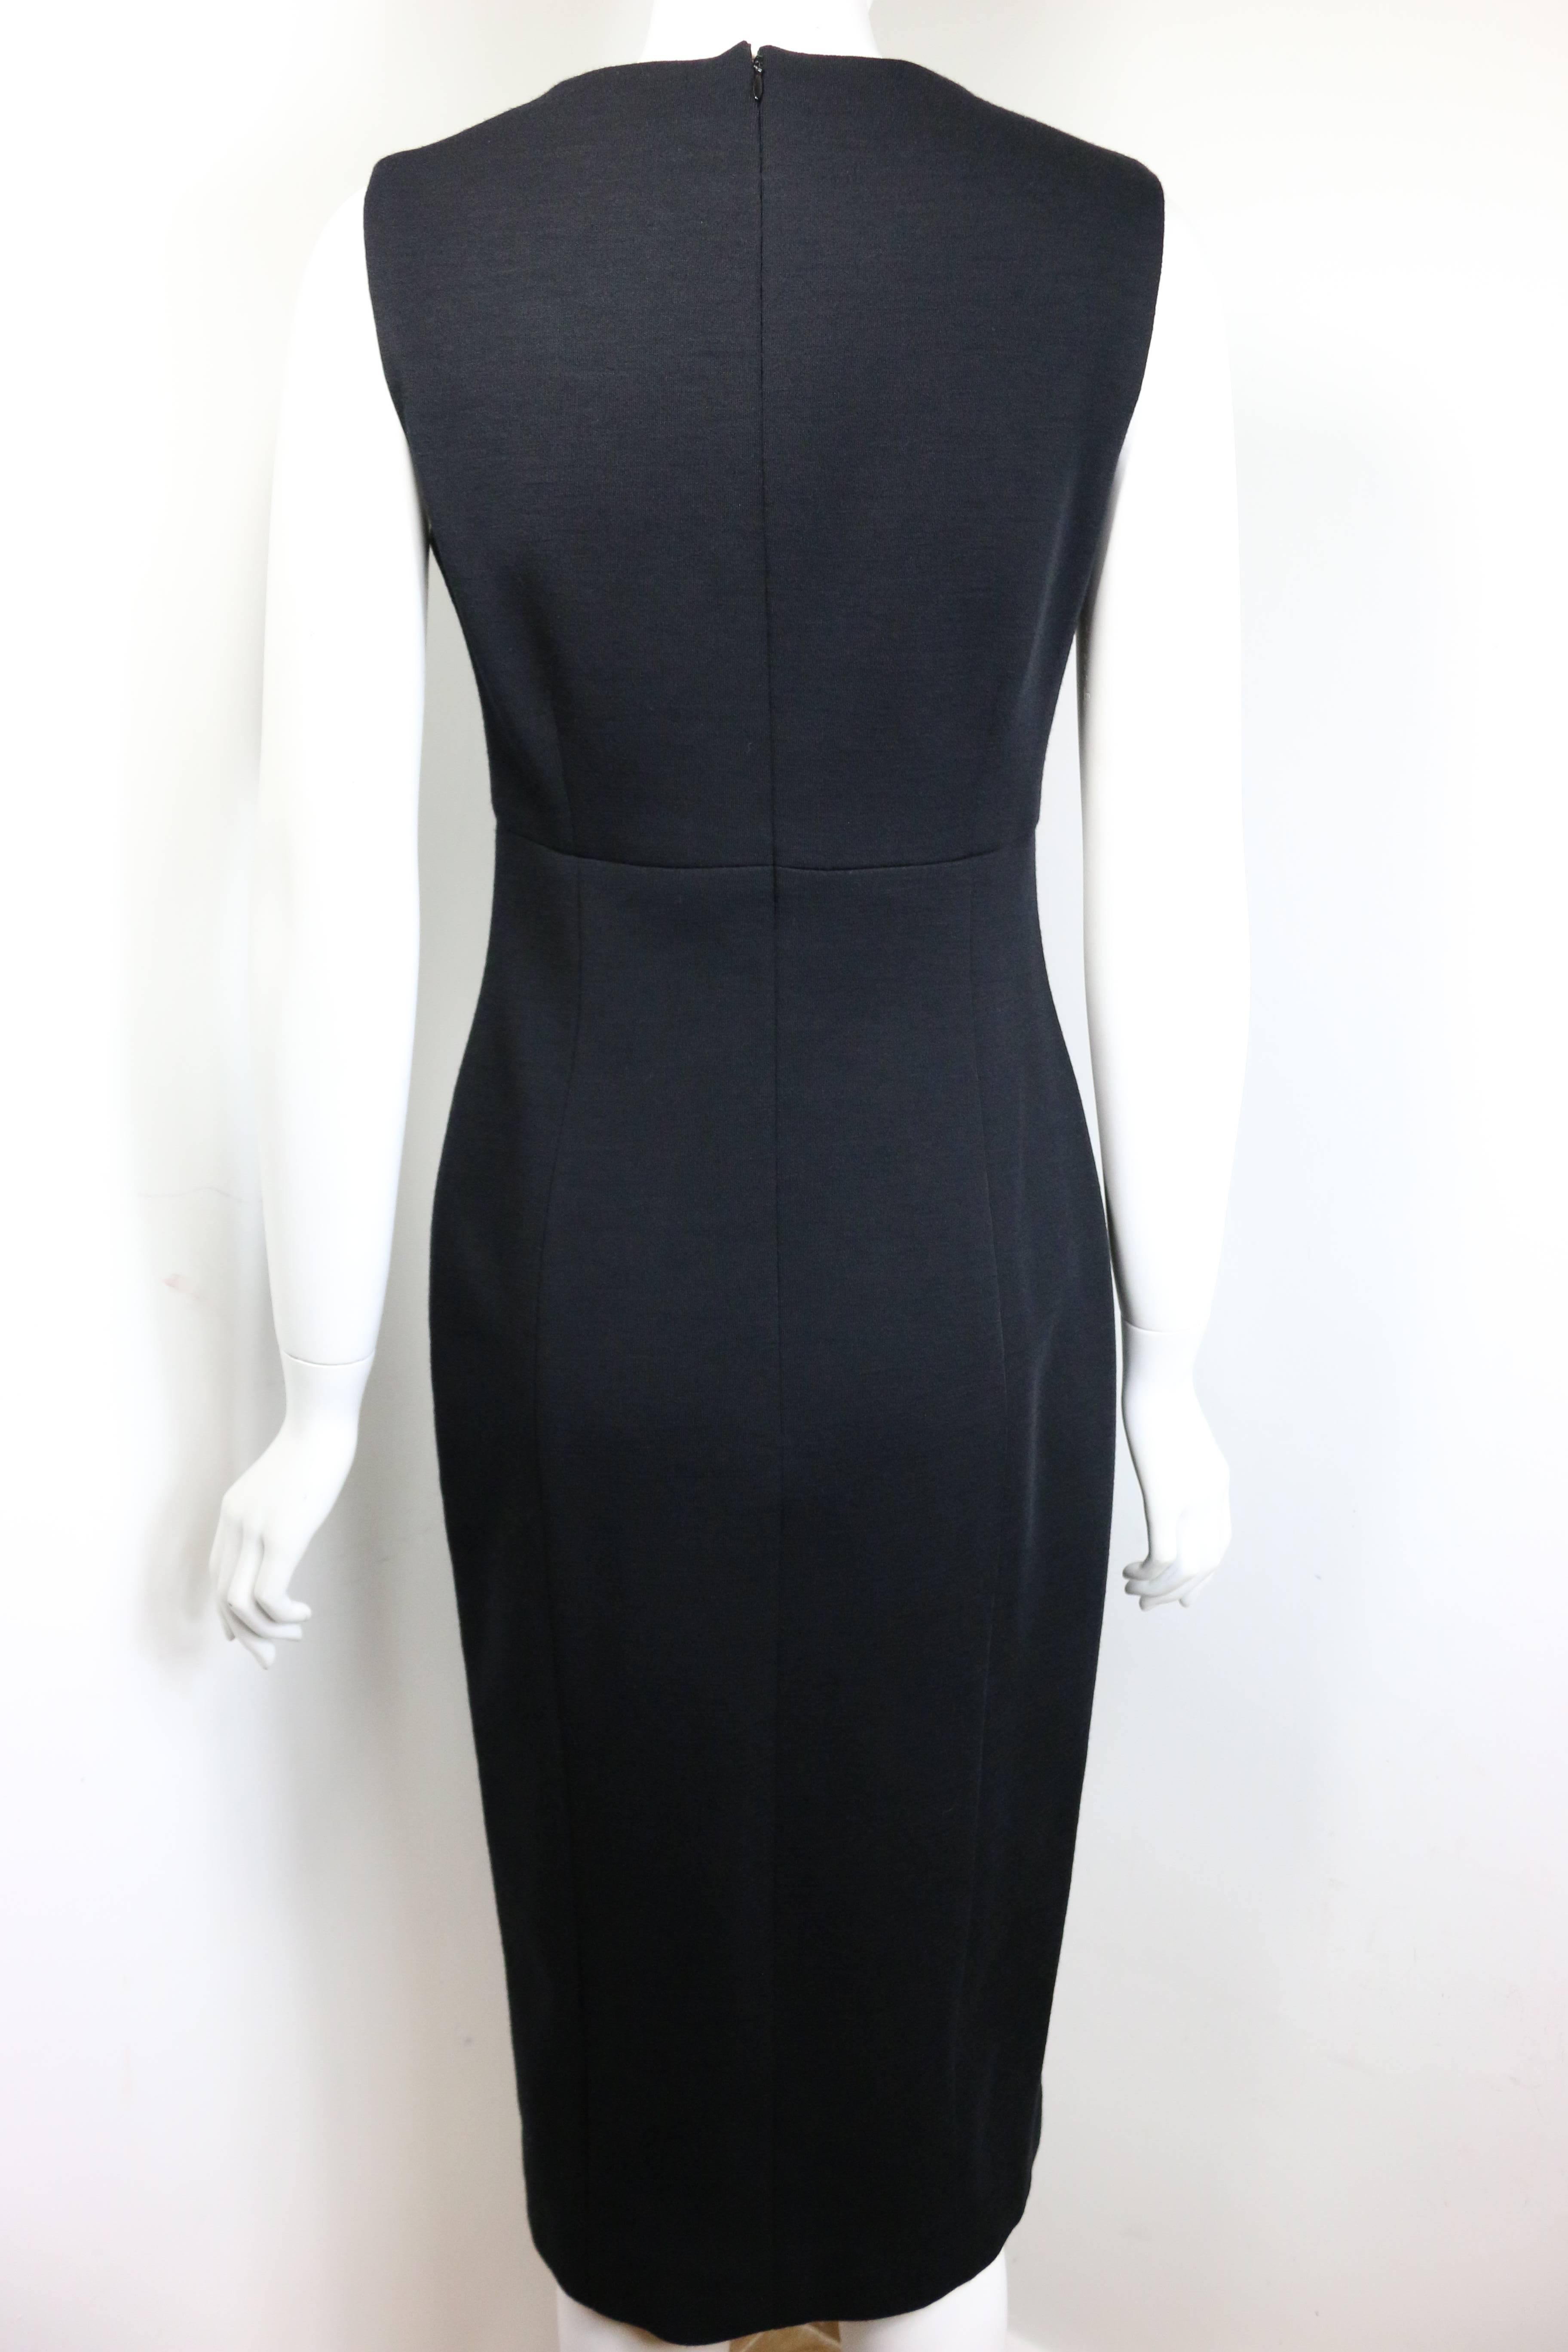 Chanel Little Black Dress In Excellent Condition For Sale In Sheung Wan, HK